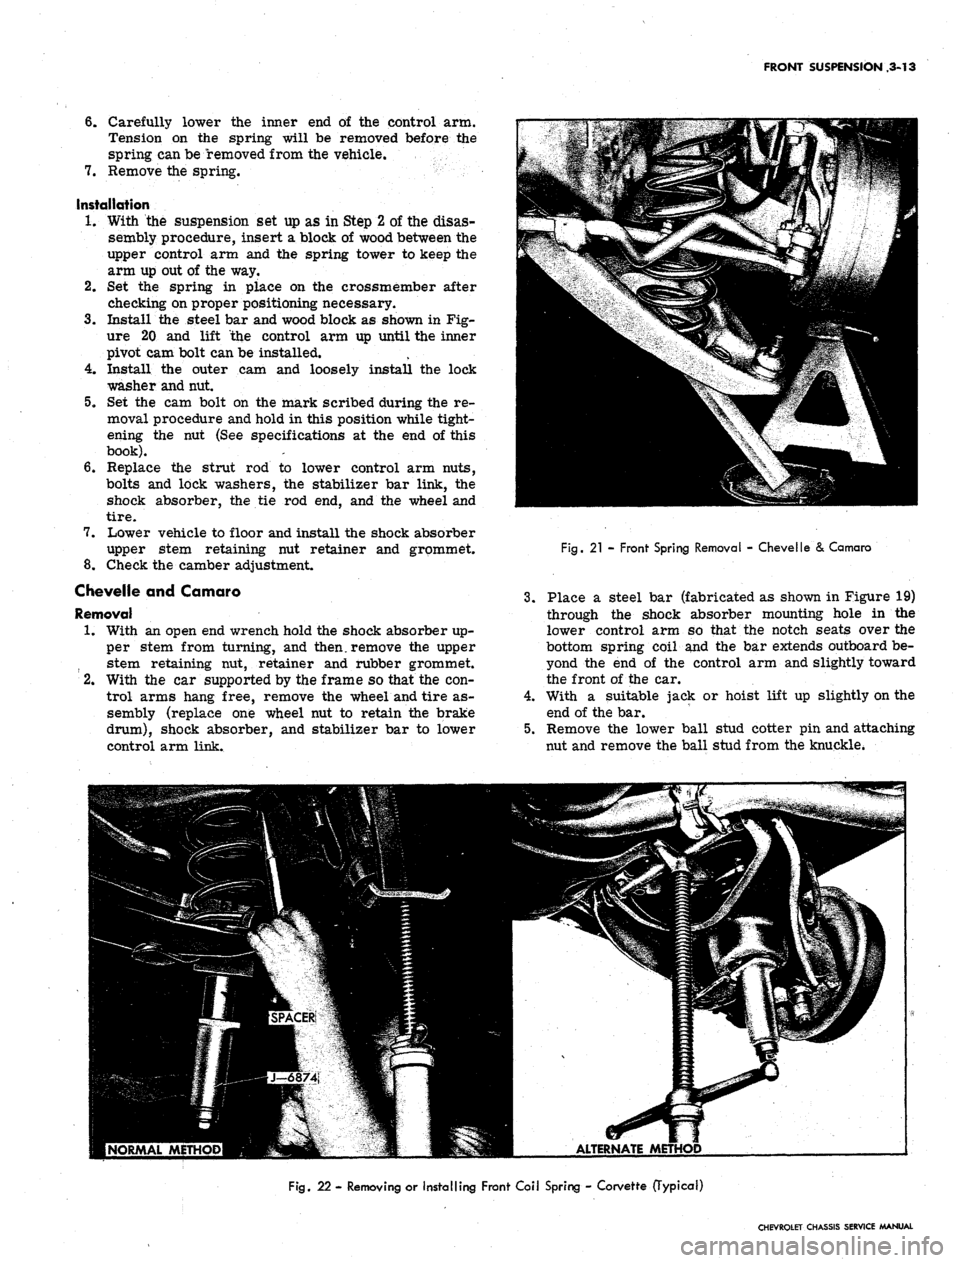 CHEVROLET CAMARO 1967 1.G Chassis User Guide 
FRONT SUSPENSION ,3-13

6. Carefully lower the inner end of the control arm.

Tension on the spring will be removed before the

spring can be removed from the vehicle.

7.
 Remove the spring.

Instal